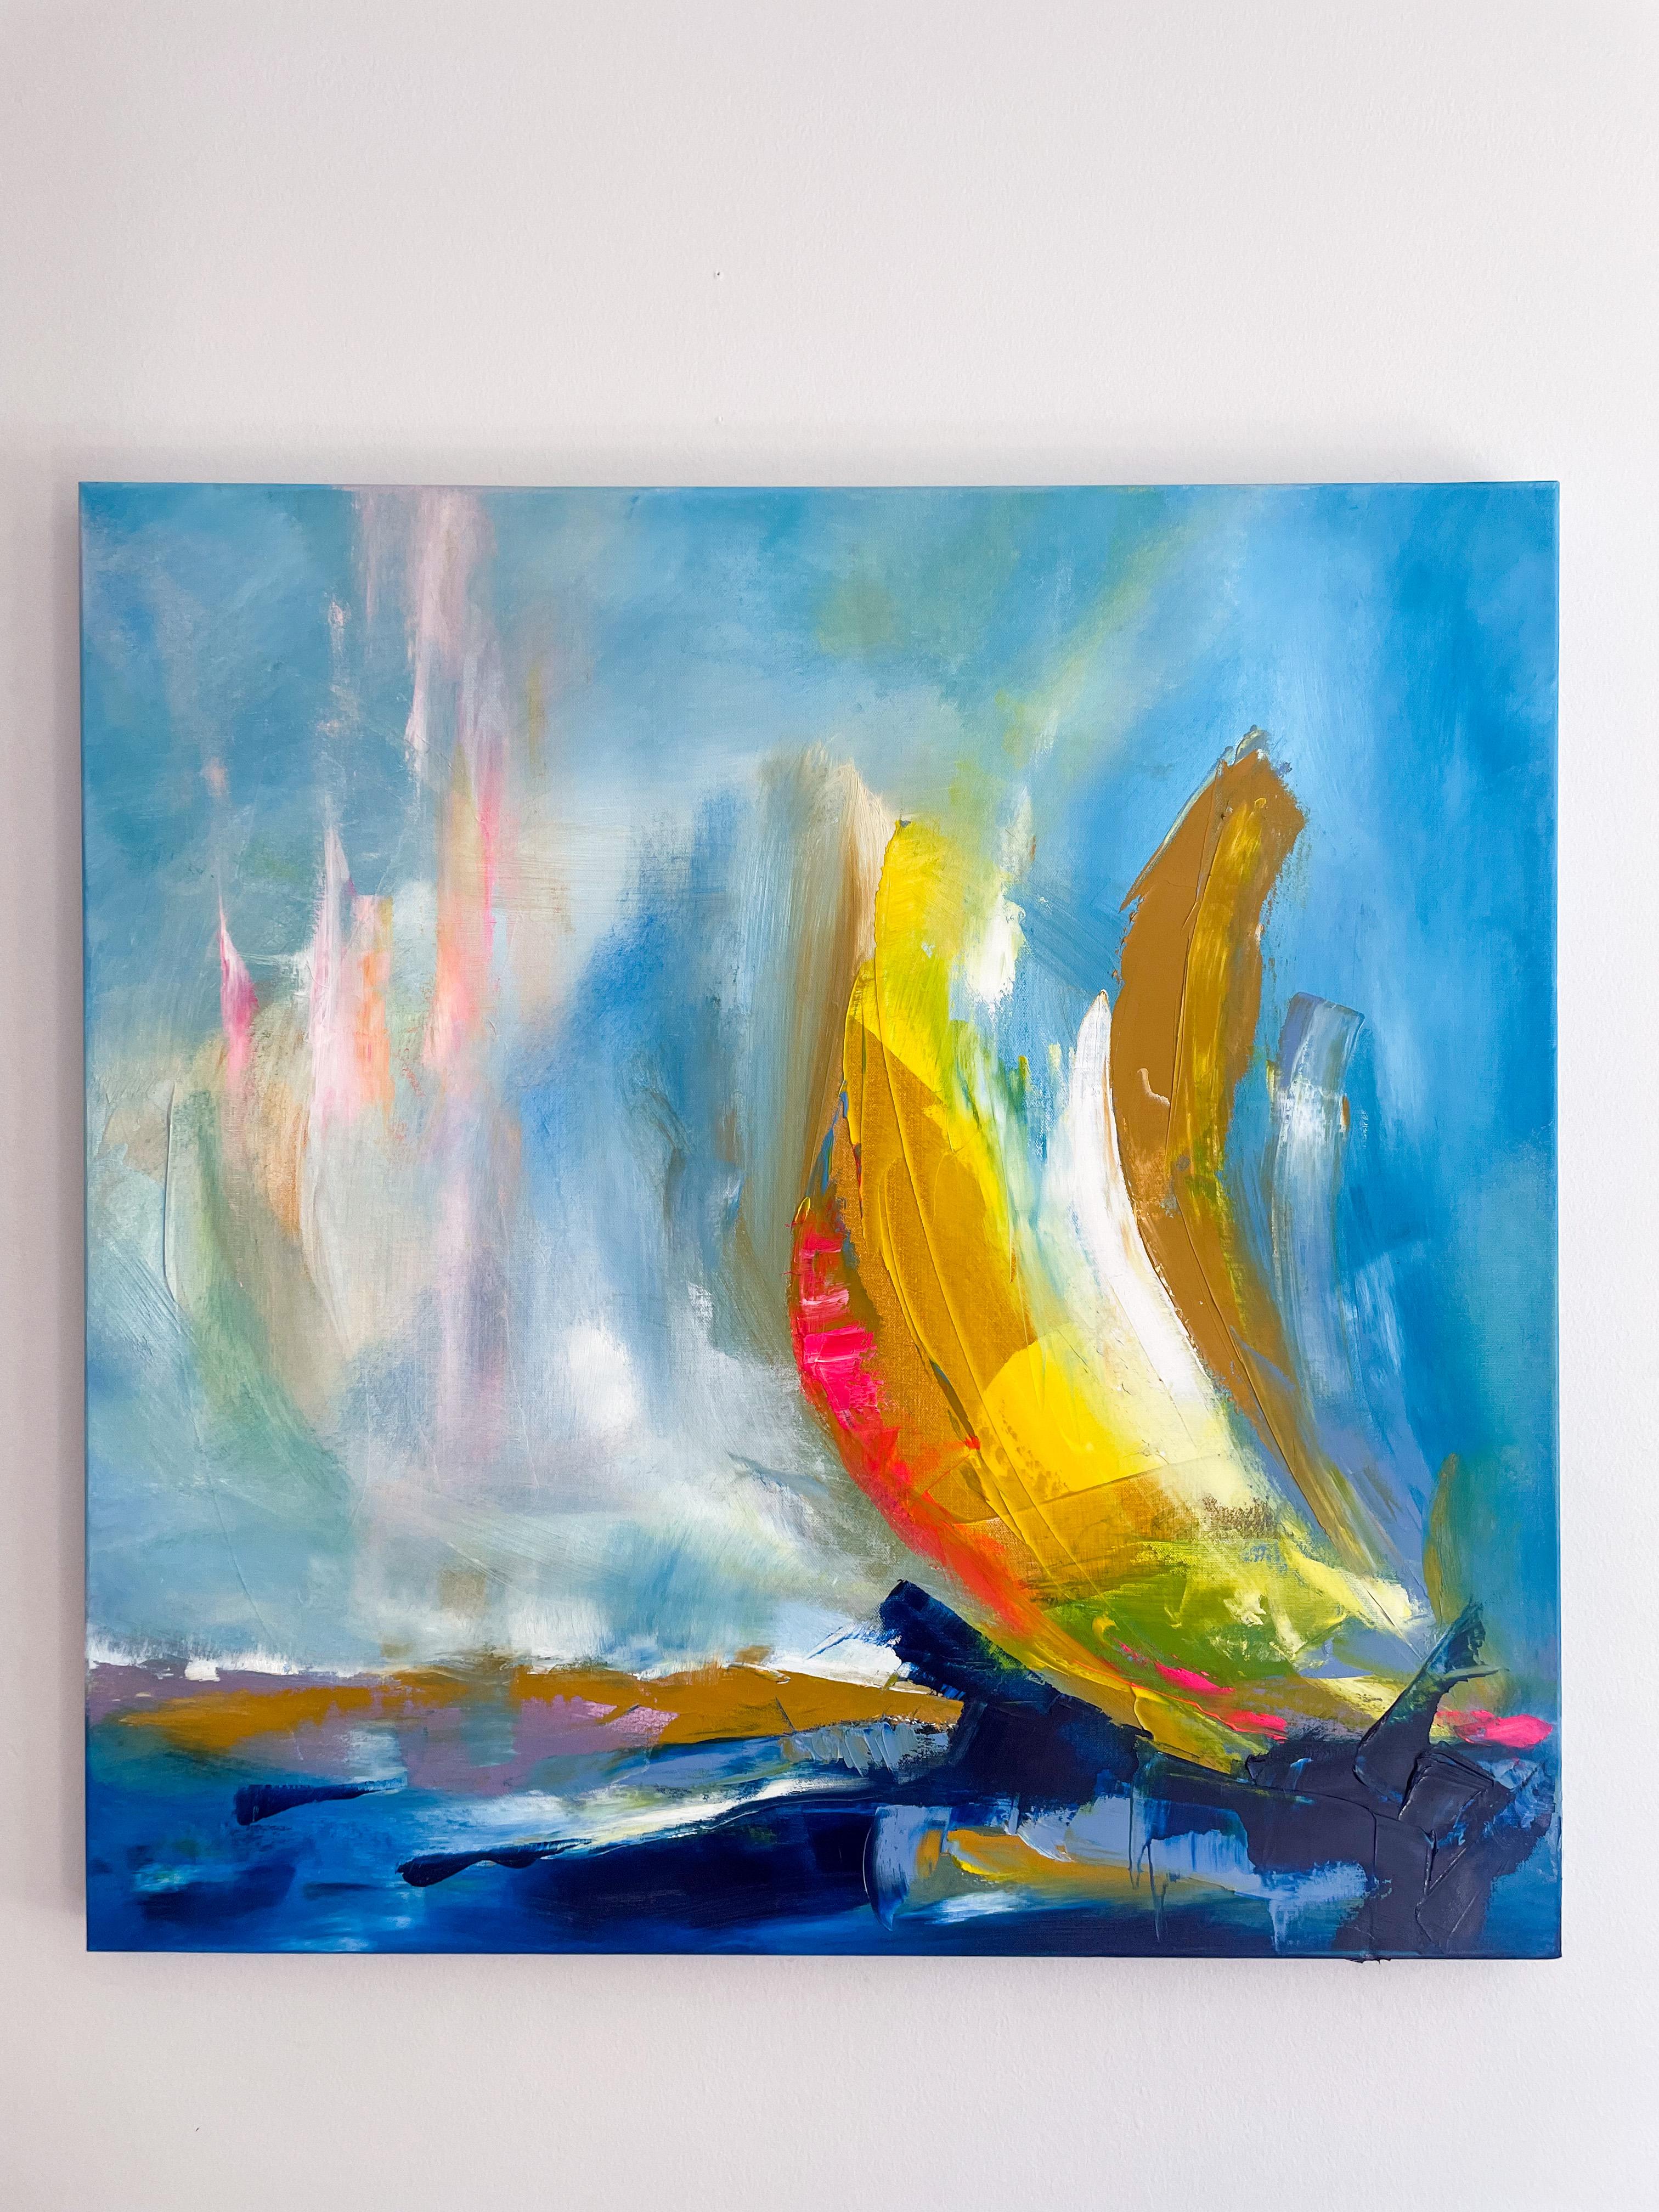 <p>Artist Comments<br>Artist Sarah Parsons paints a colorful abstract in expressive colors and dynamic painterly strokes. Deep shades of royal blue diverge from a dreamy haze of powder blue, suggestive of a seascape being treaded by a yellow-masted